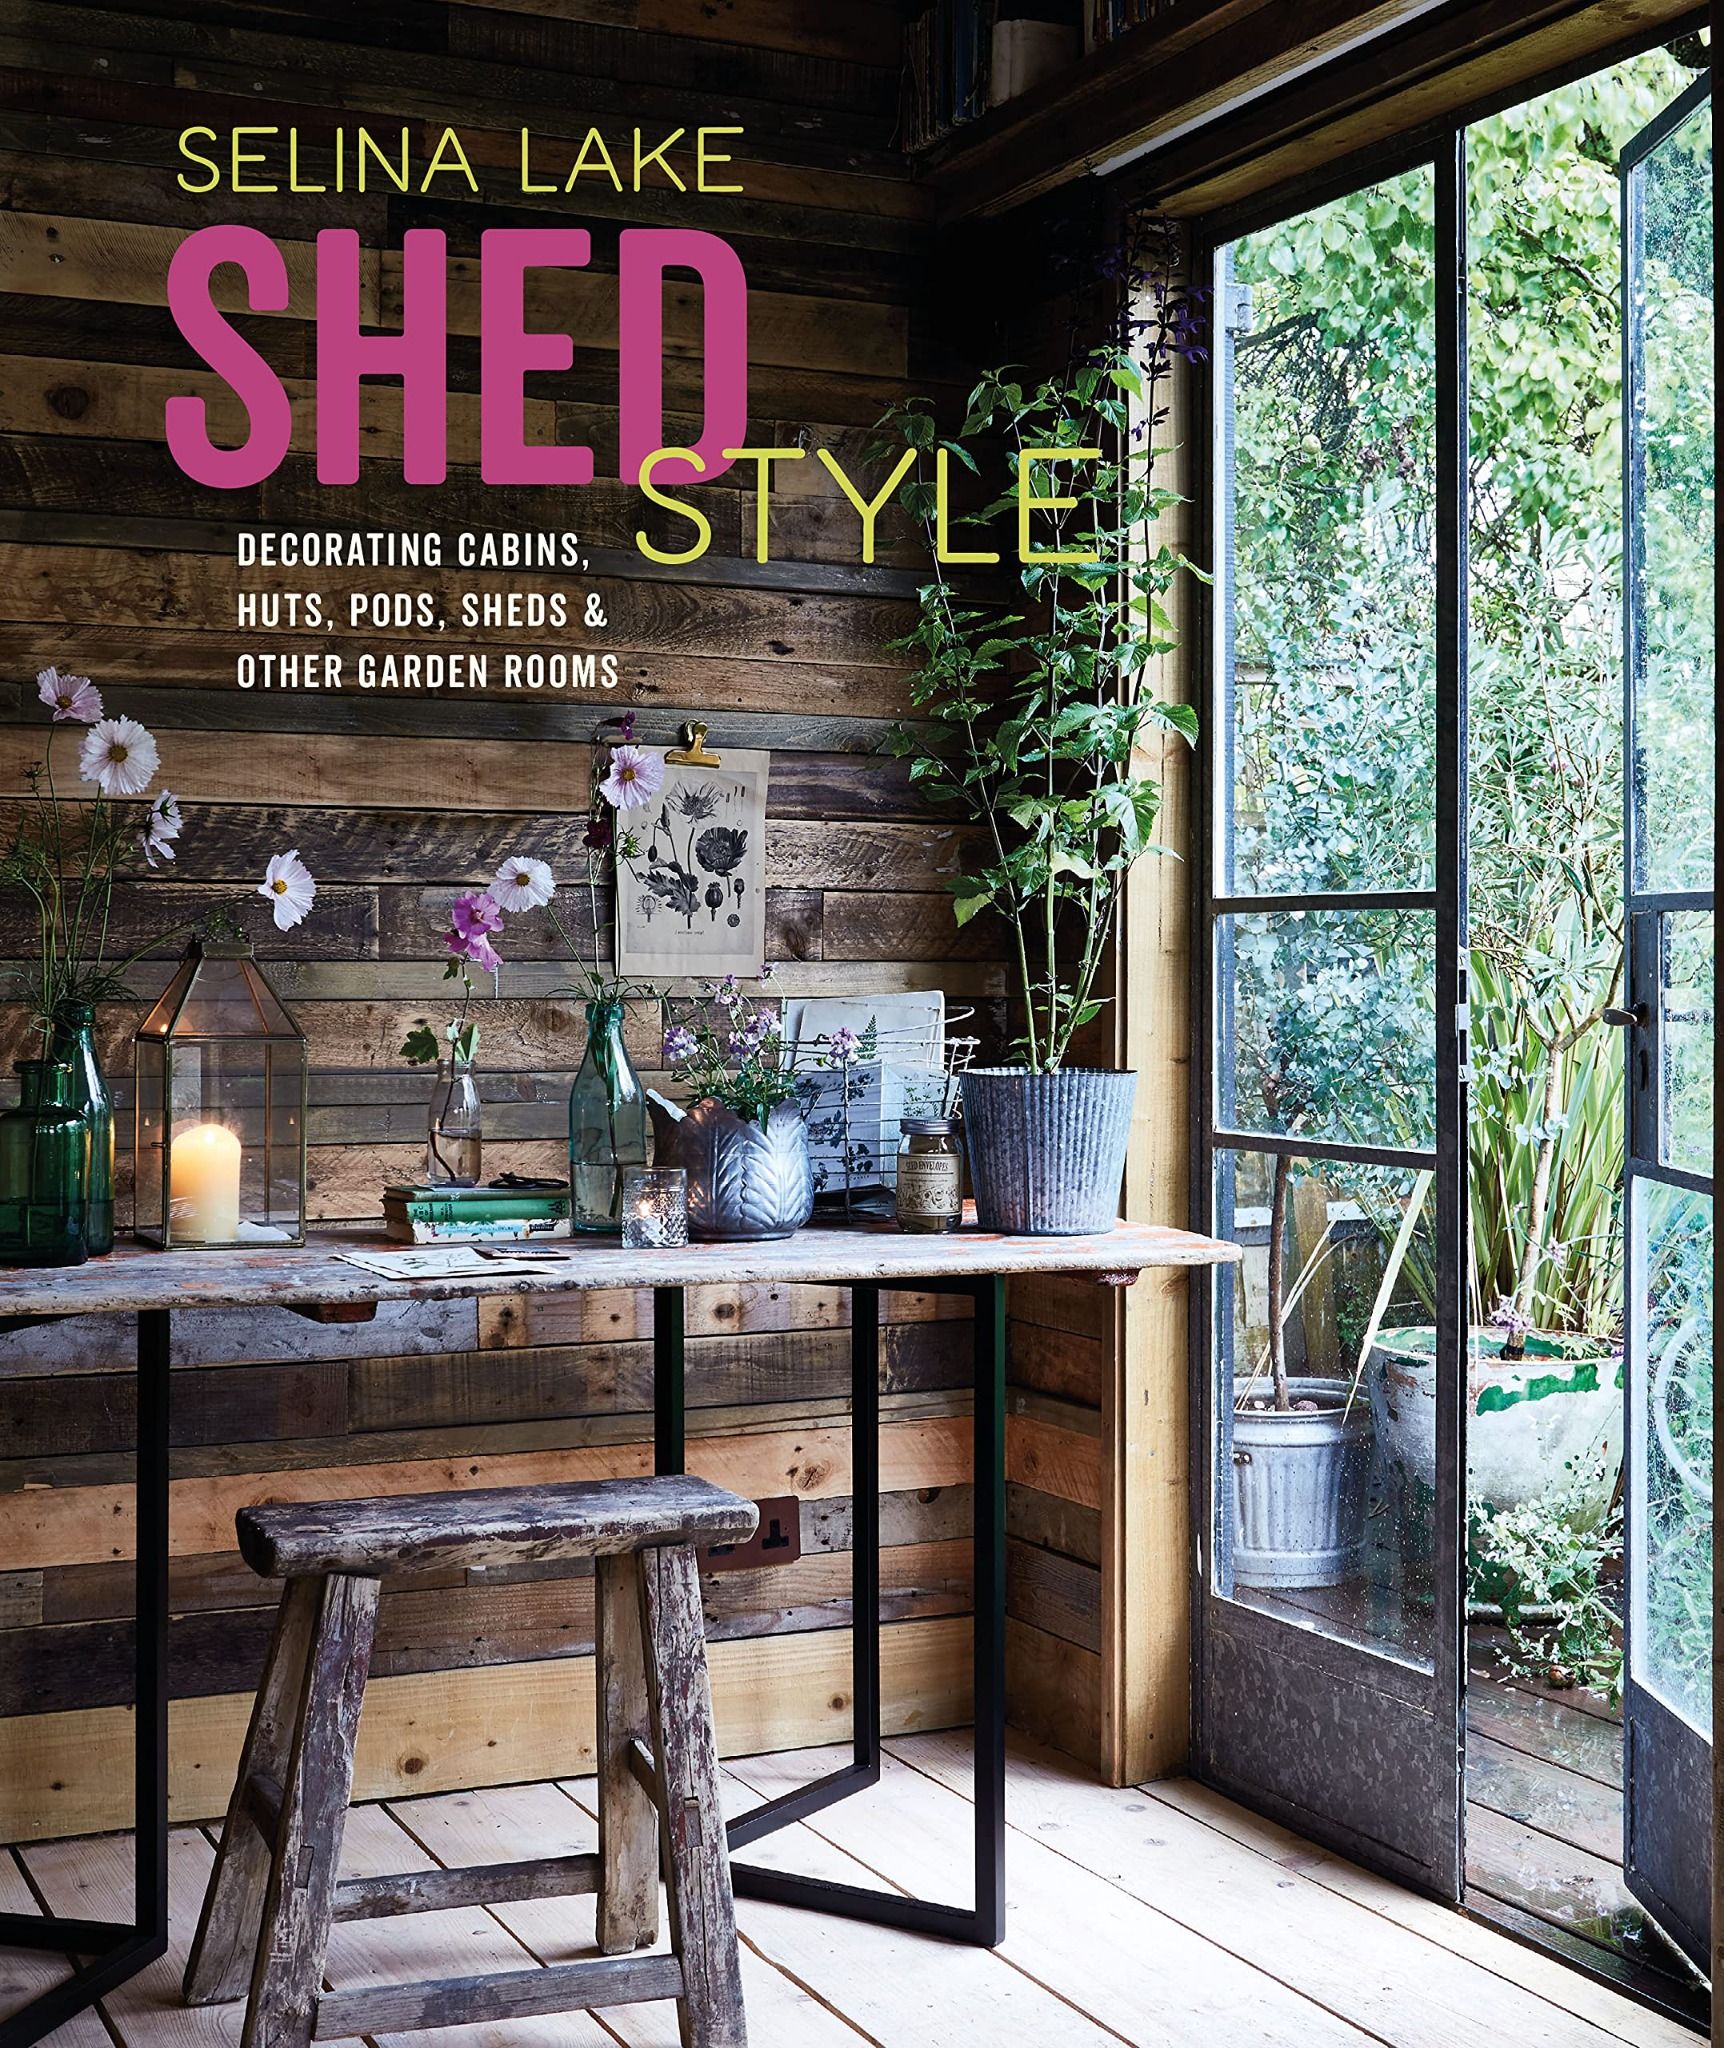  Shed Style: Decorating cabins, huts, pods, sheds & other garden rooms 